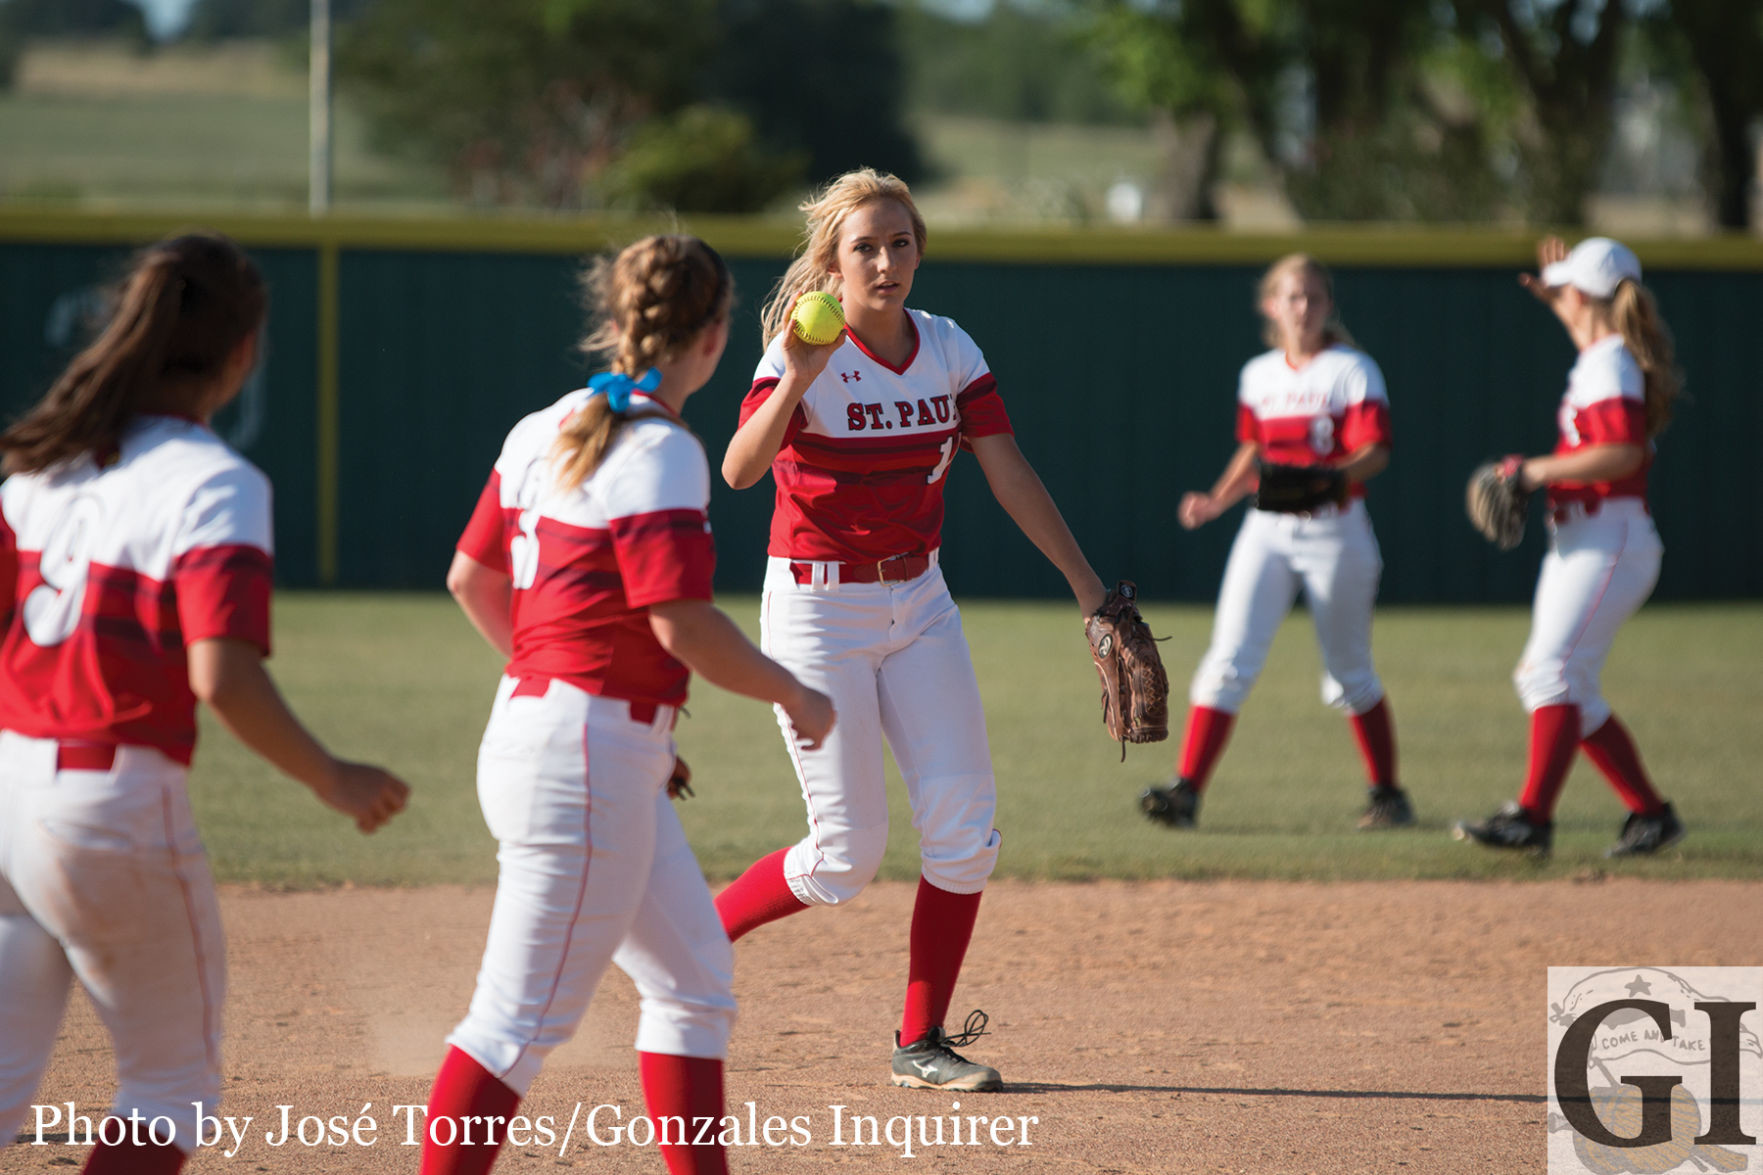 Delynn Pesek (15) shows off the ball after tagging out a runner in the second.